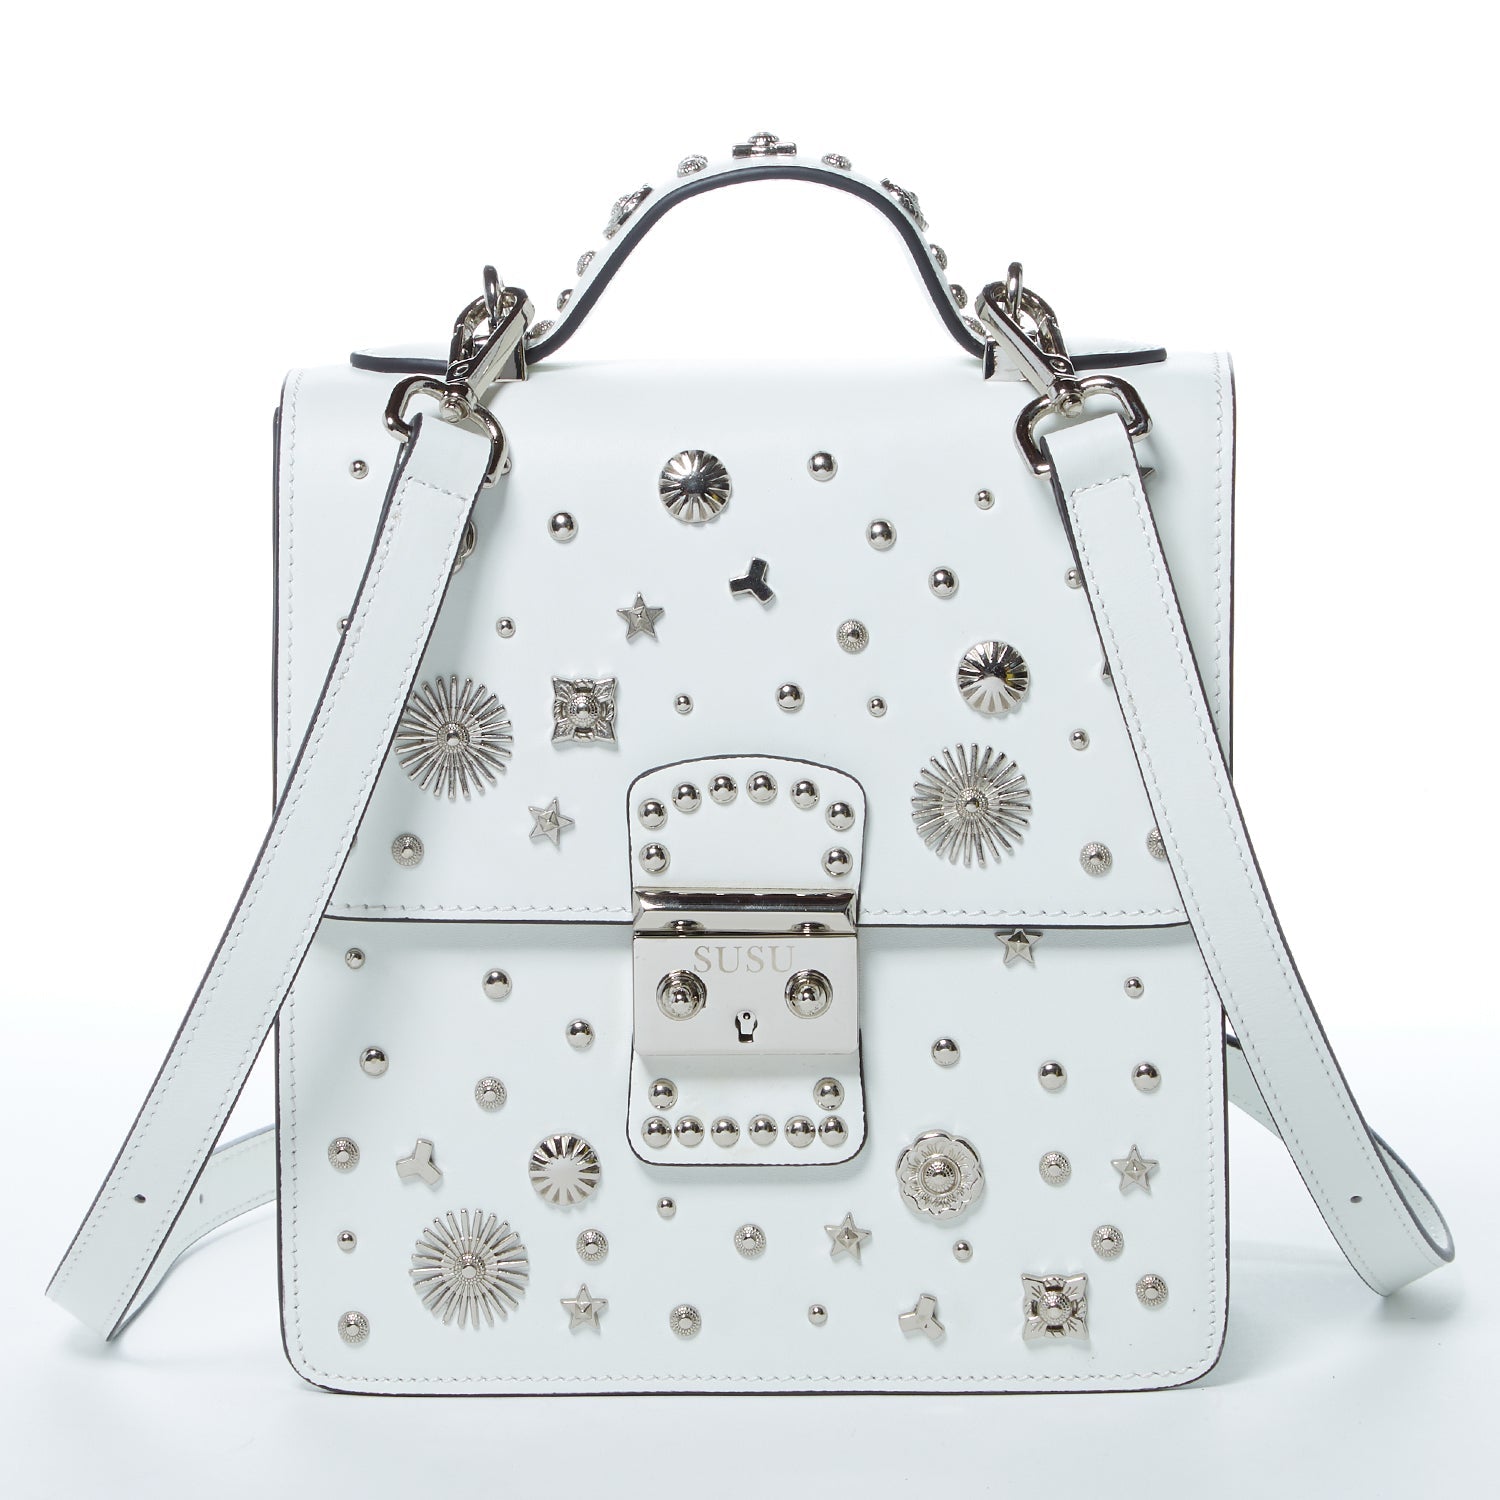 The Hollywood Backpack Leather Purse White - Guy Christopher 